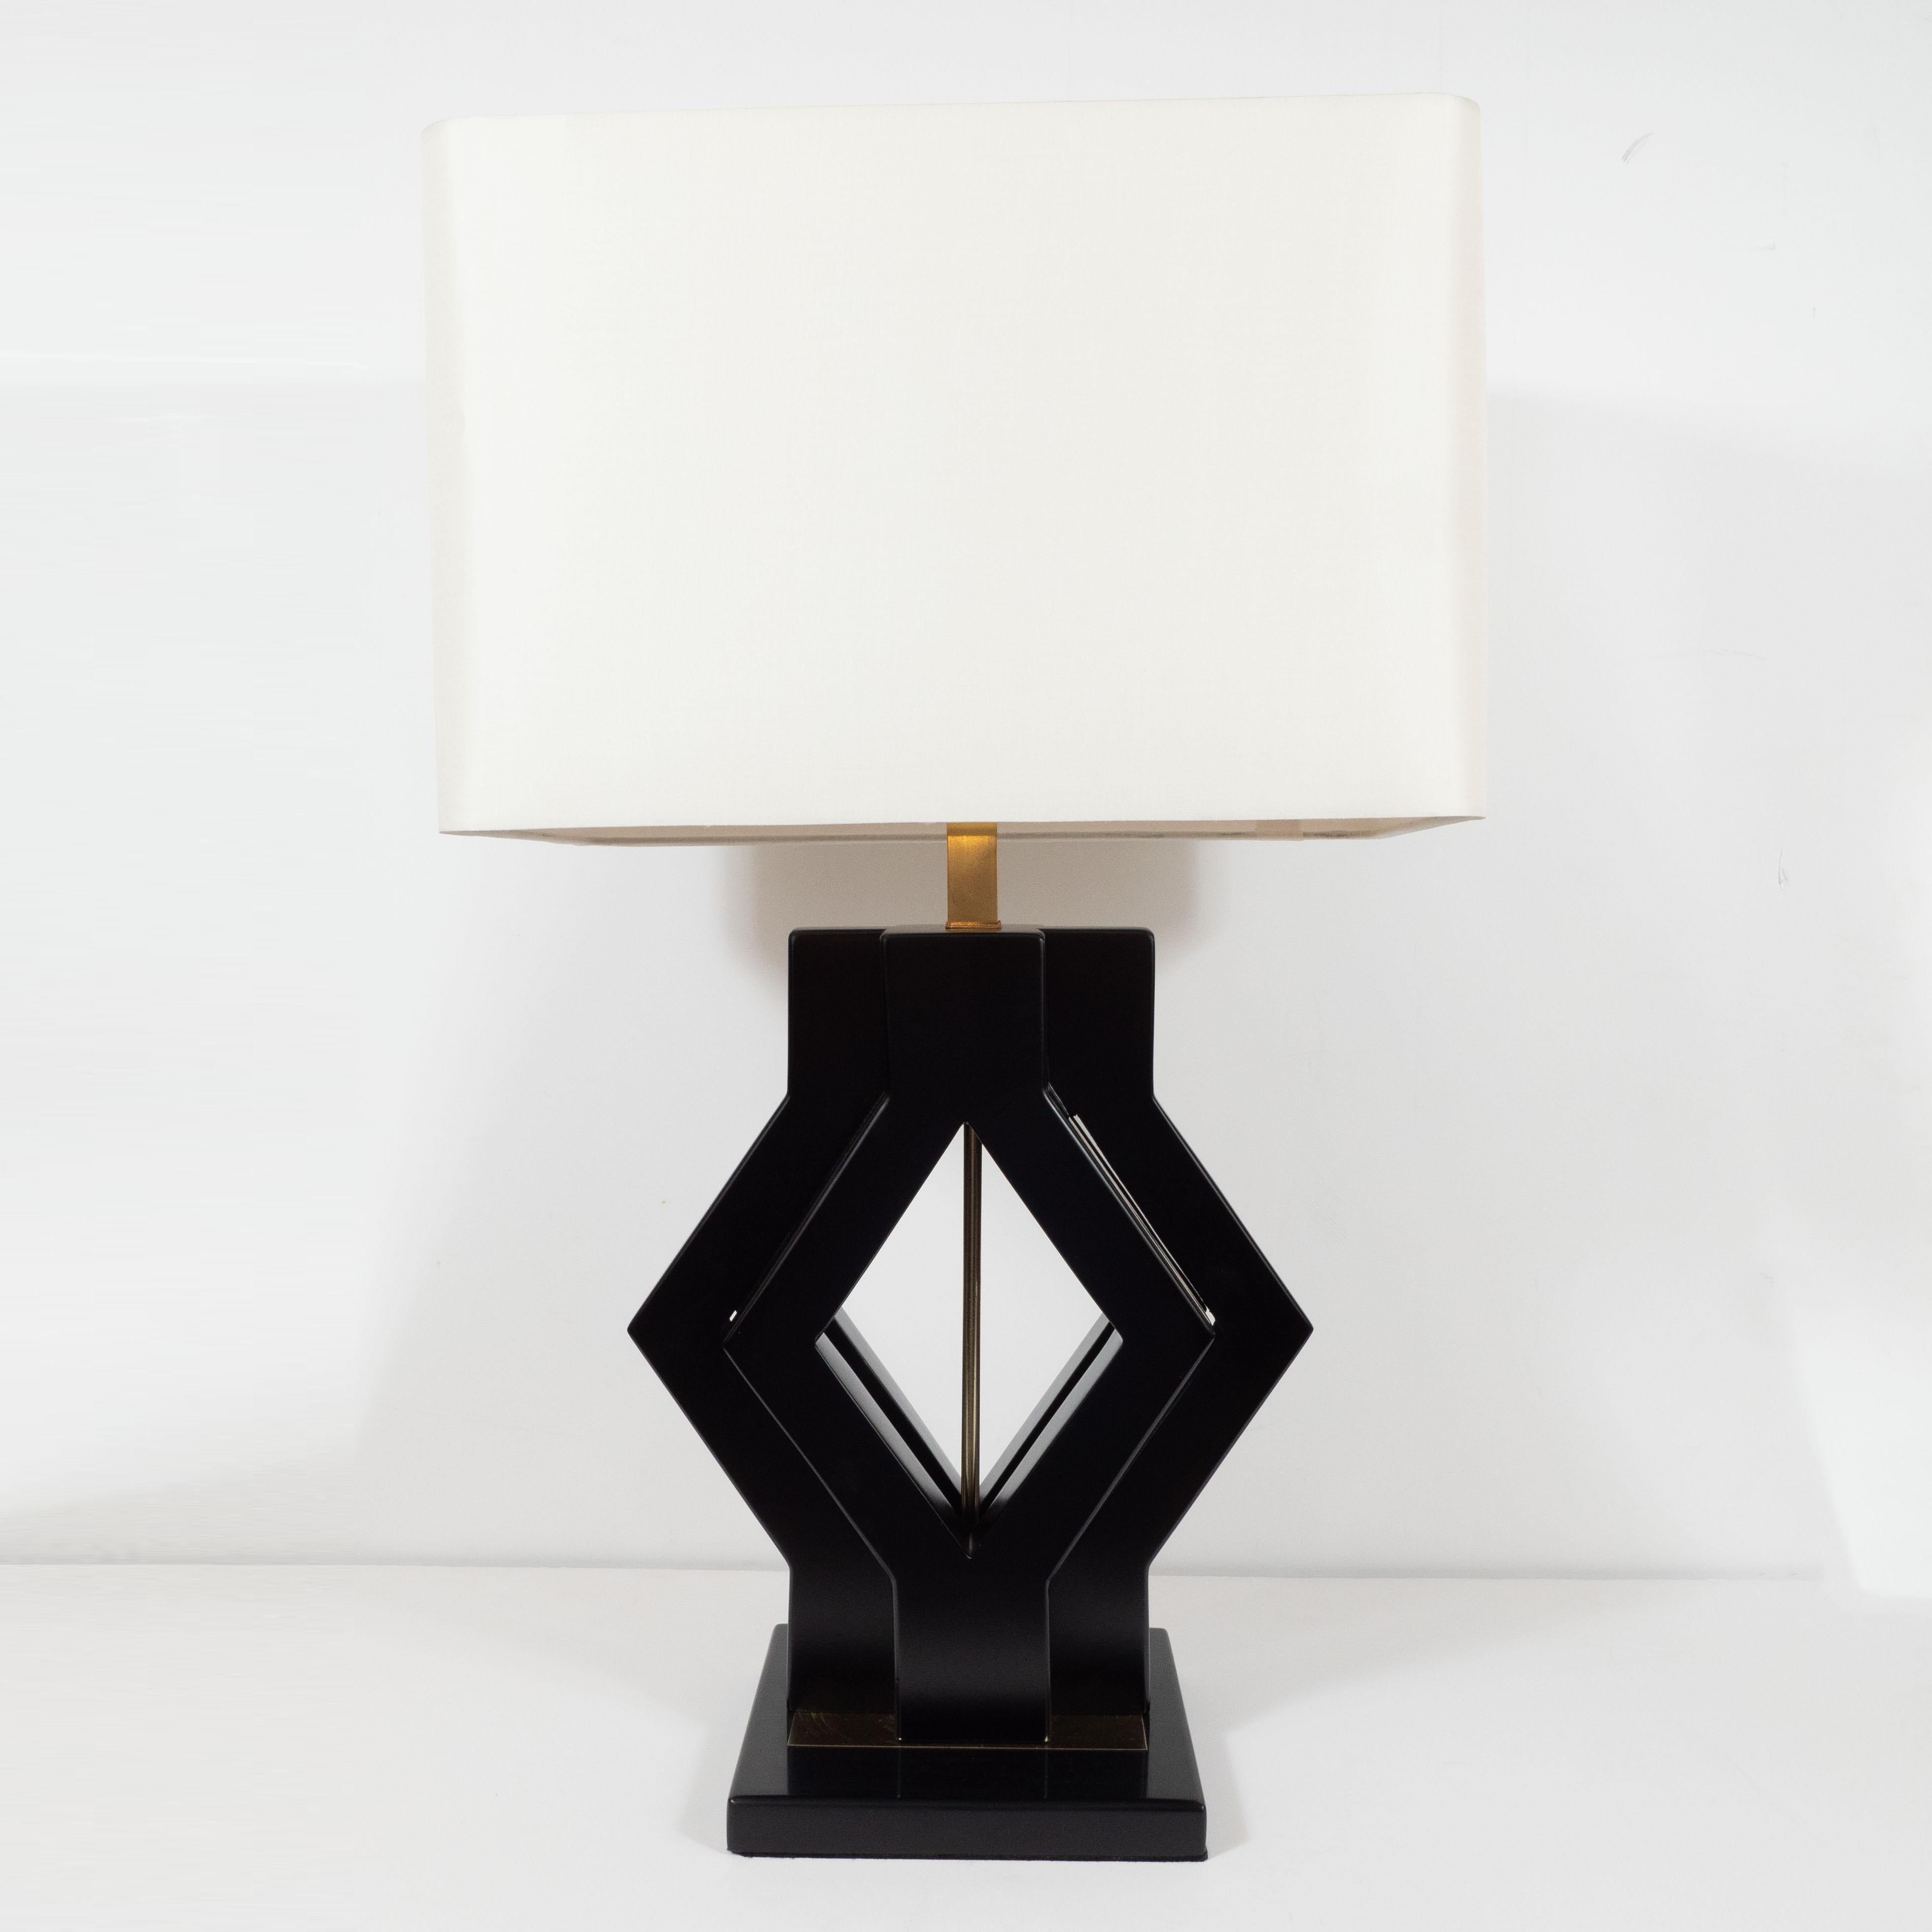 These stunning and graphic table lamps were realized in the United States, circa 1970. They feature a square ebonized walnut base with a central polished brass plate from which two concentric diamond forms, also in ebonized walnut rise upwards. A